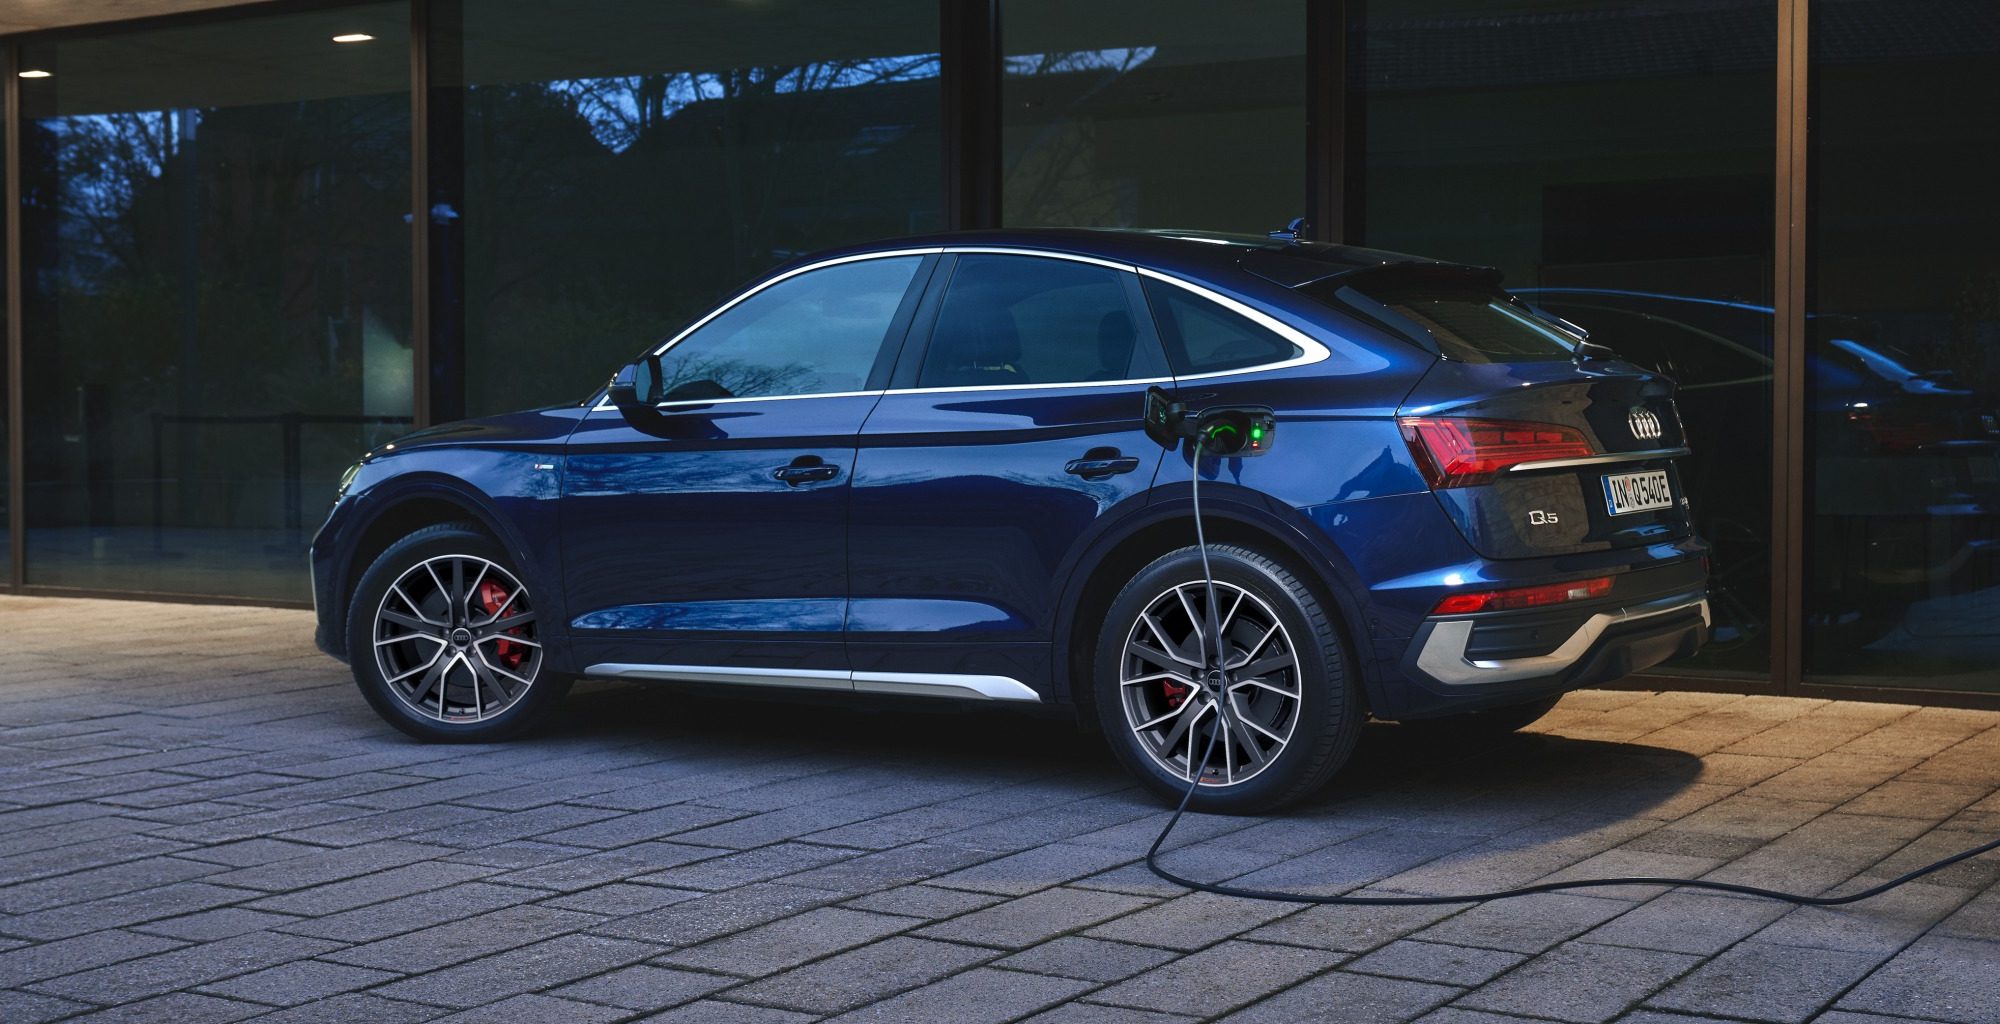 Blue Audi Q5 TFSI plugged in to a charger in a driveway